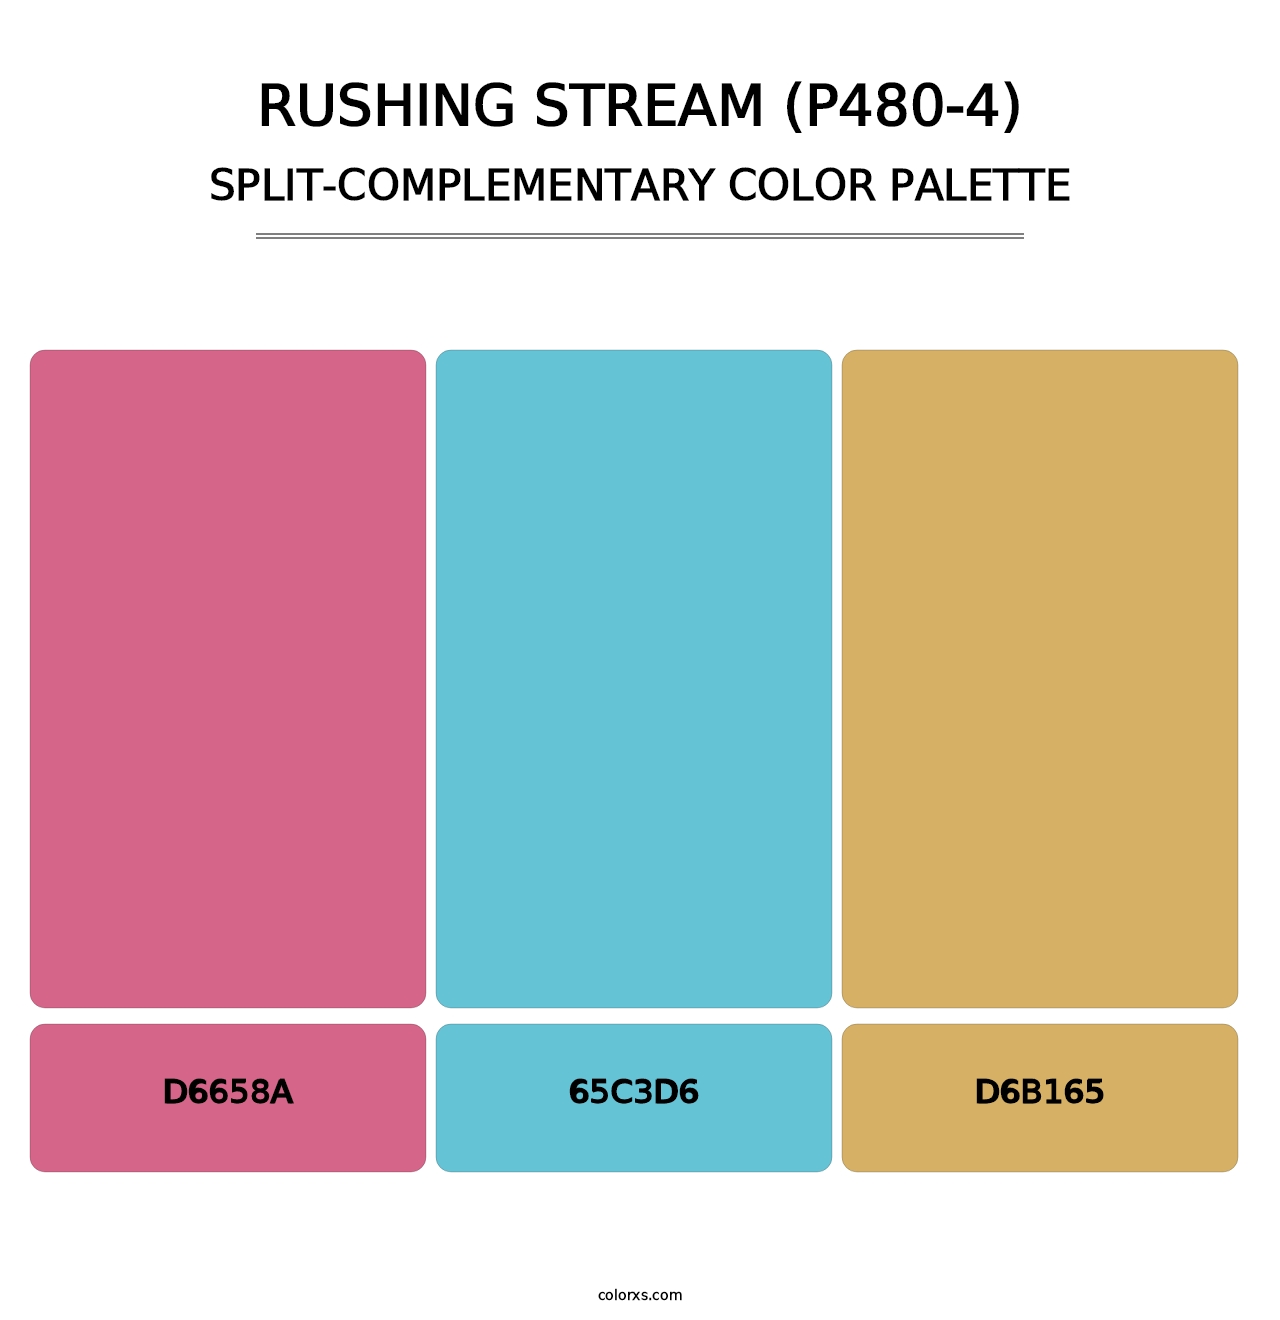 Rushing Stream (P480-4) - Split-Complementary Color Palette